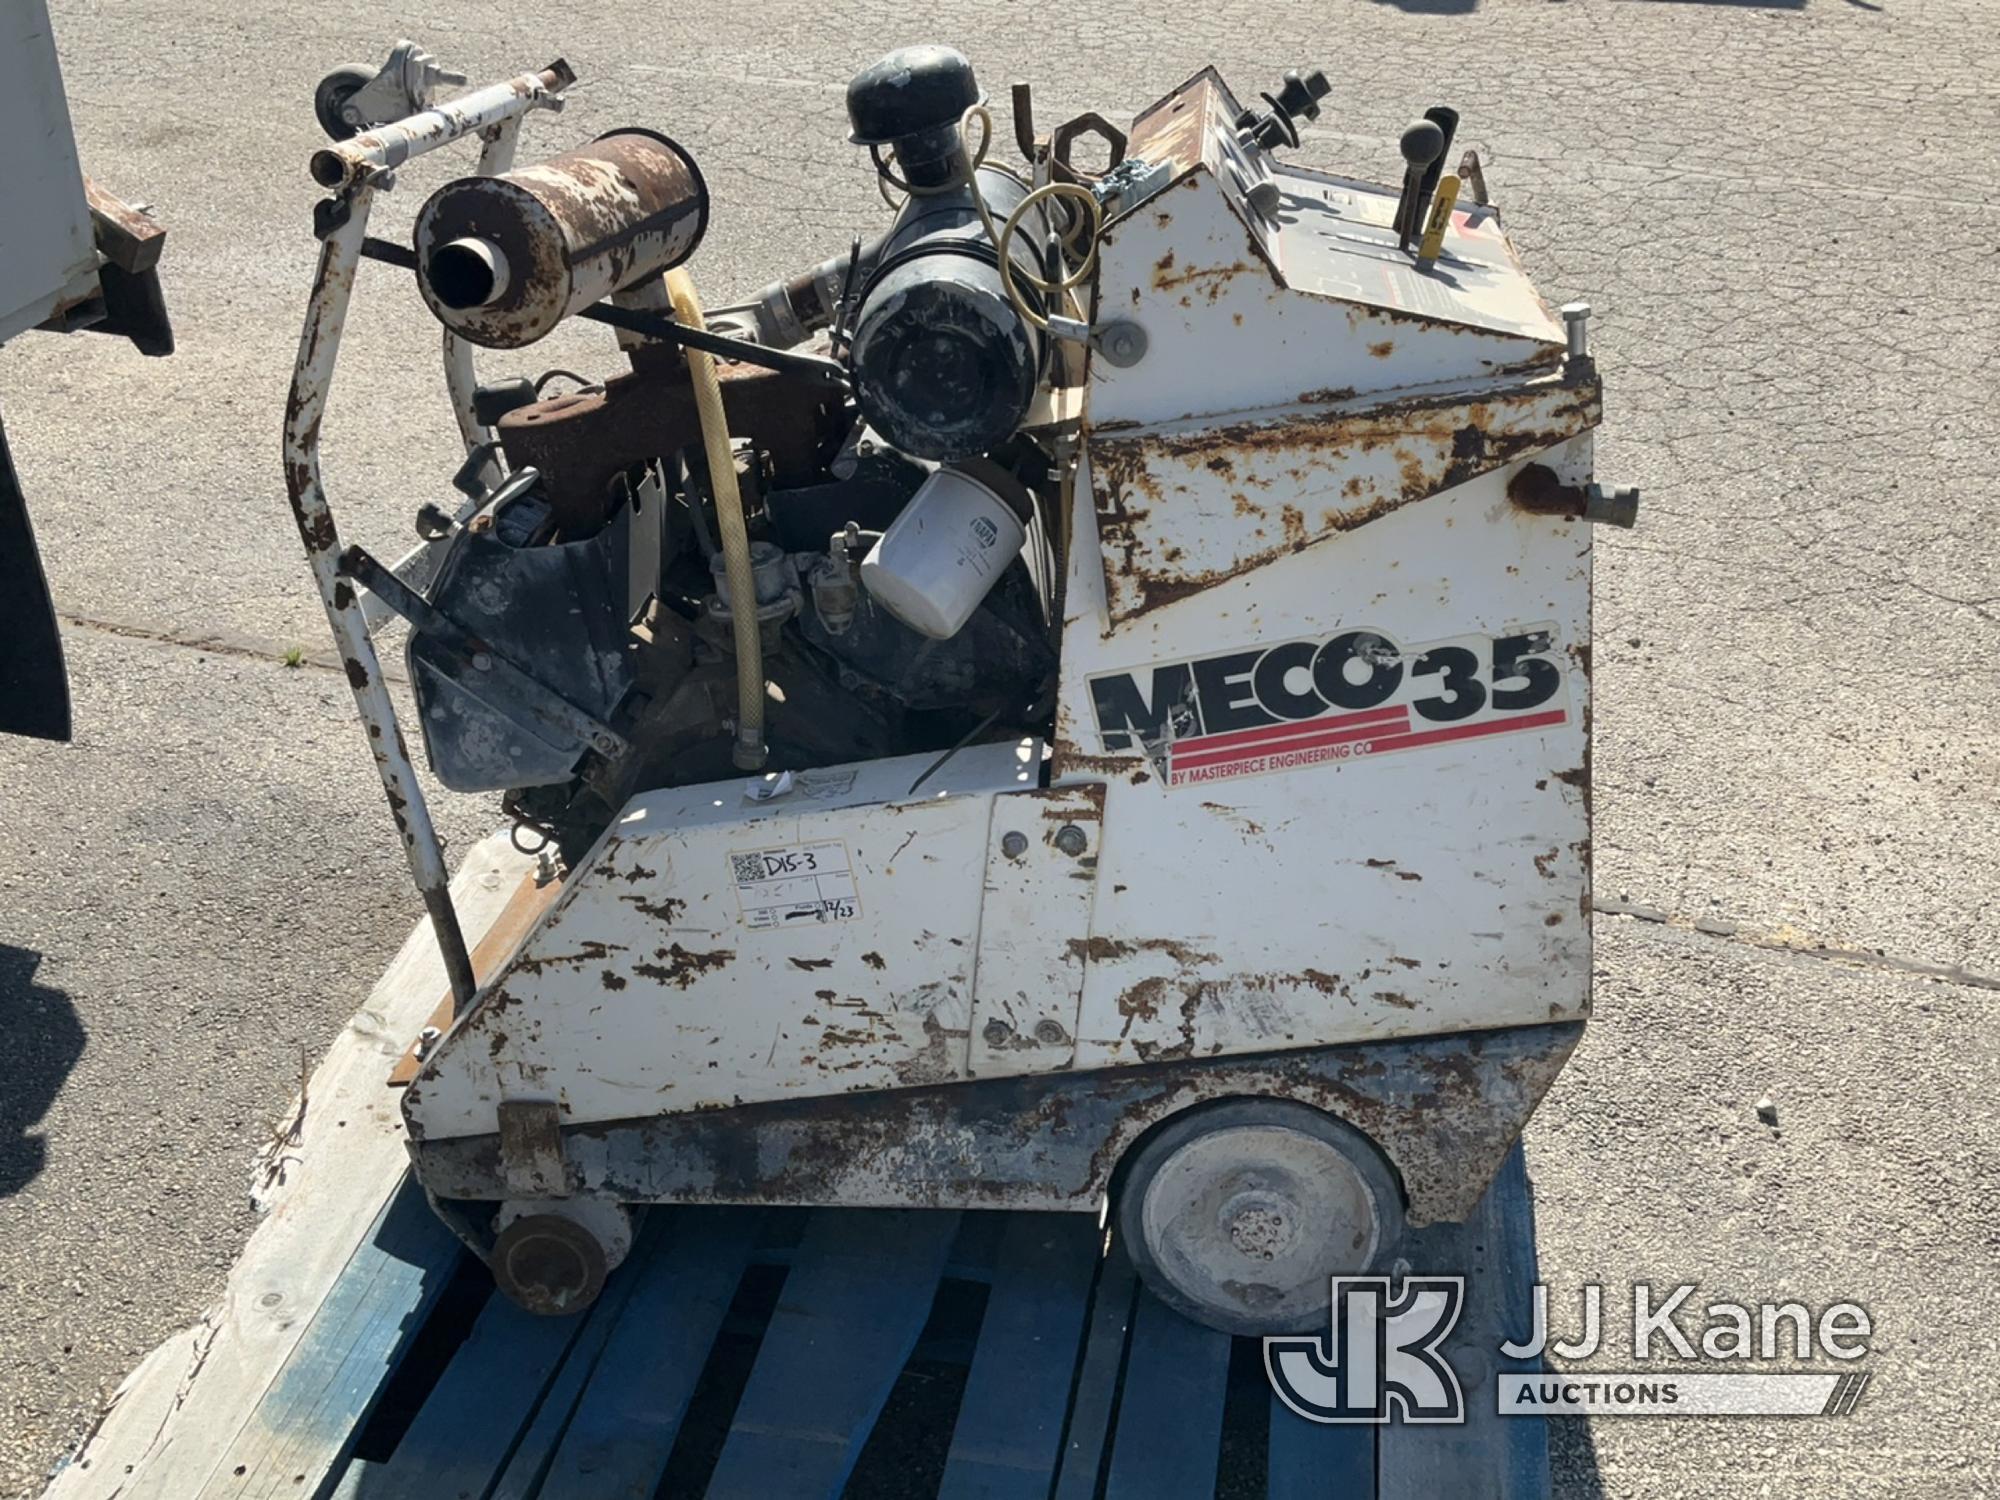 (South Beloit, IL) Meco 35 Condition Unknown) (Seller States-Operates